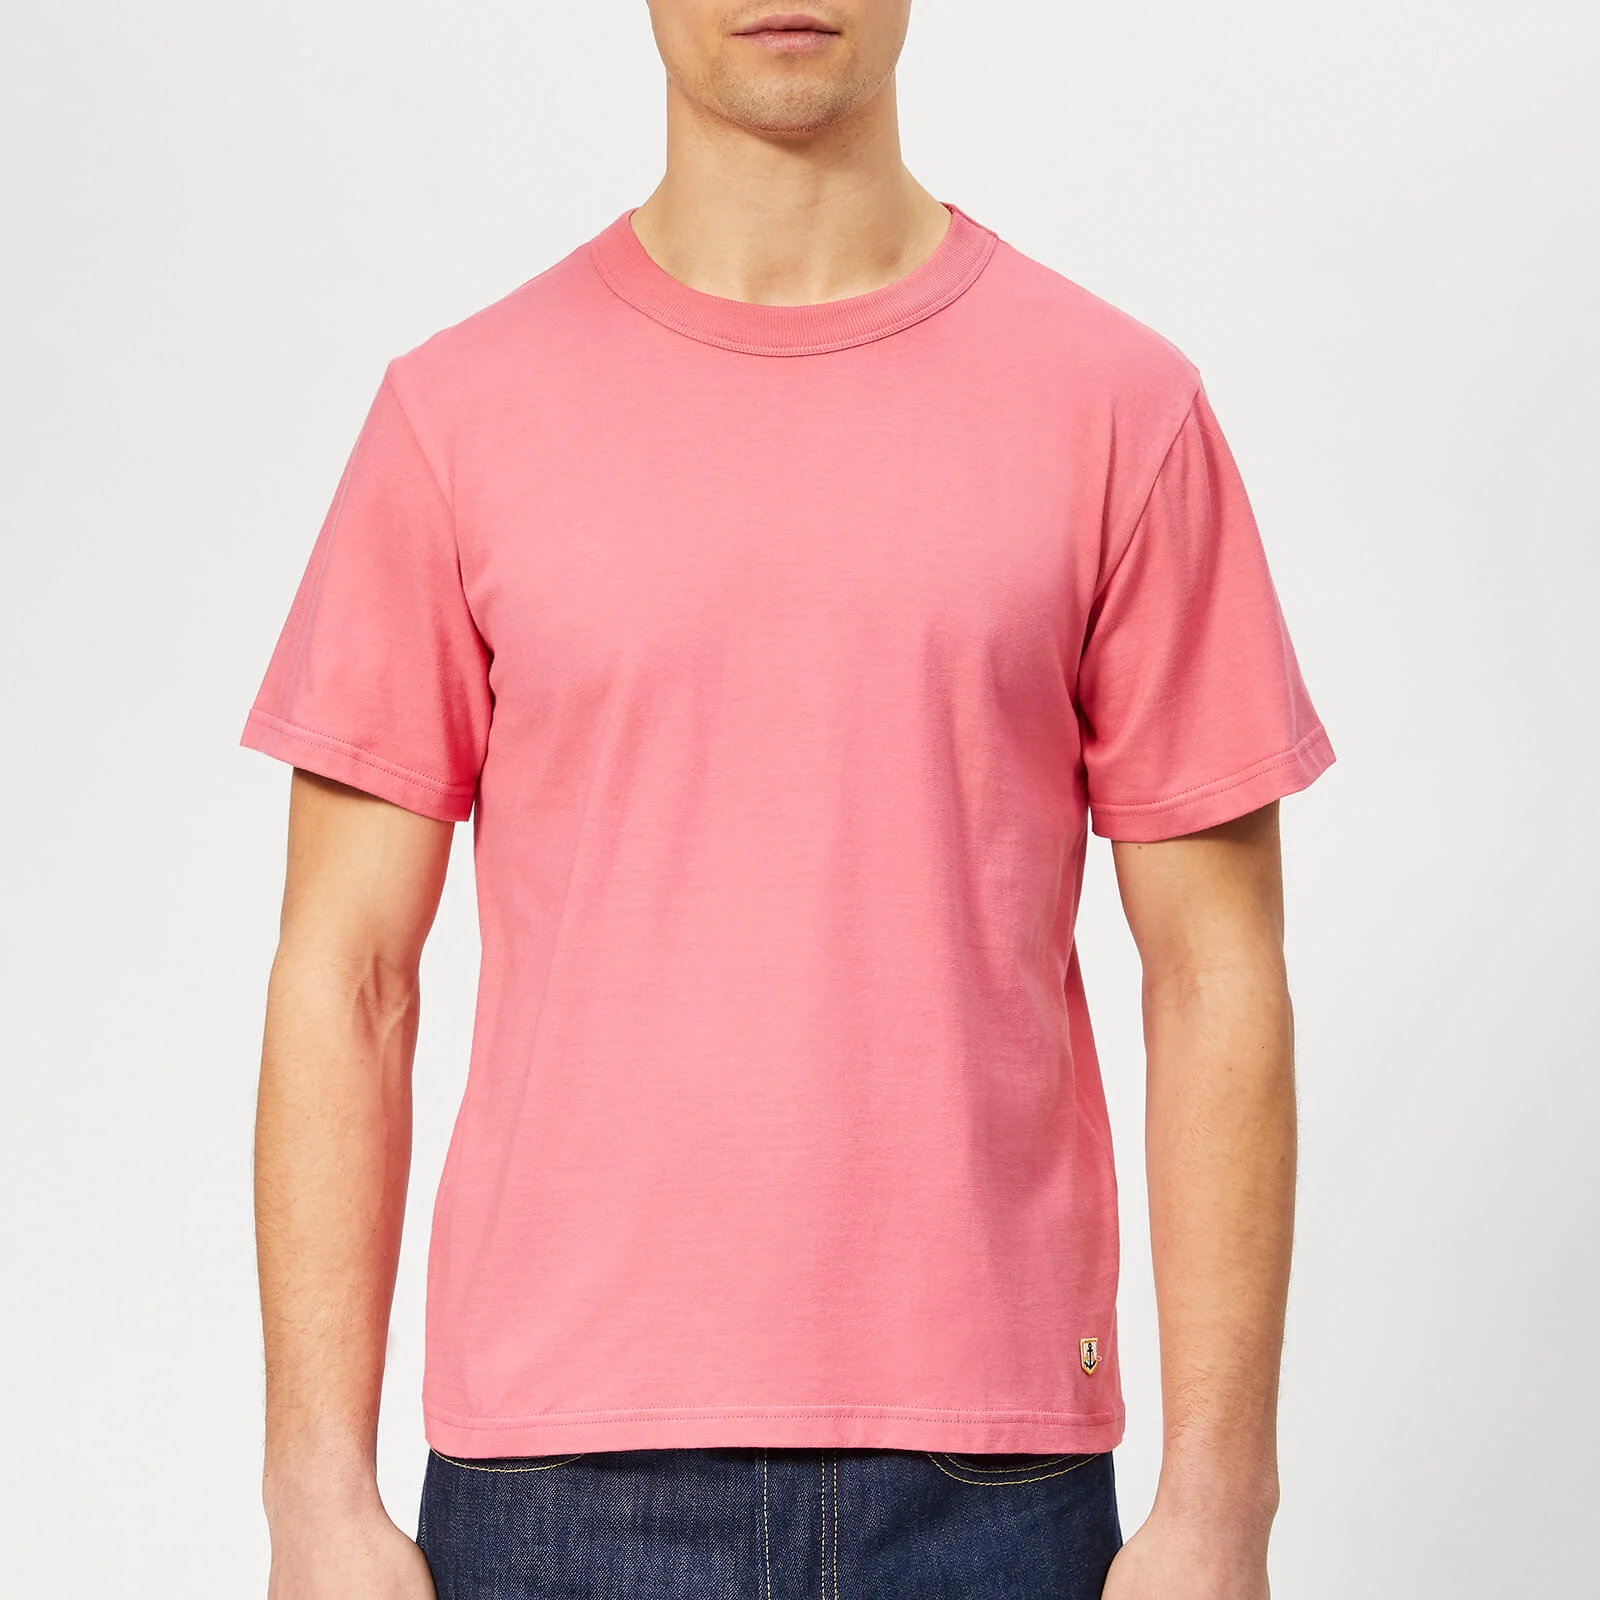 Armor Lux Men's Callac T-Shirt - New Pink Image 1